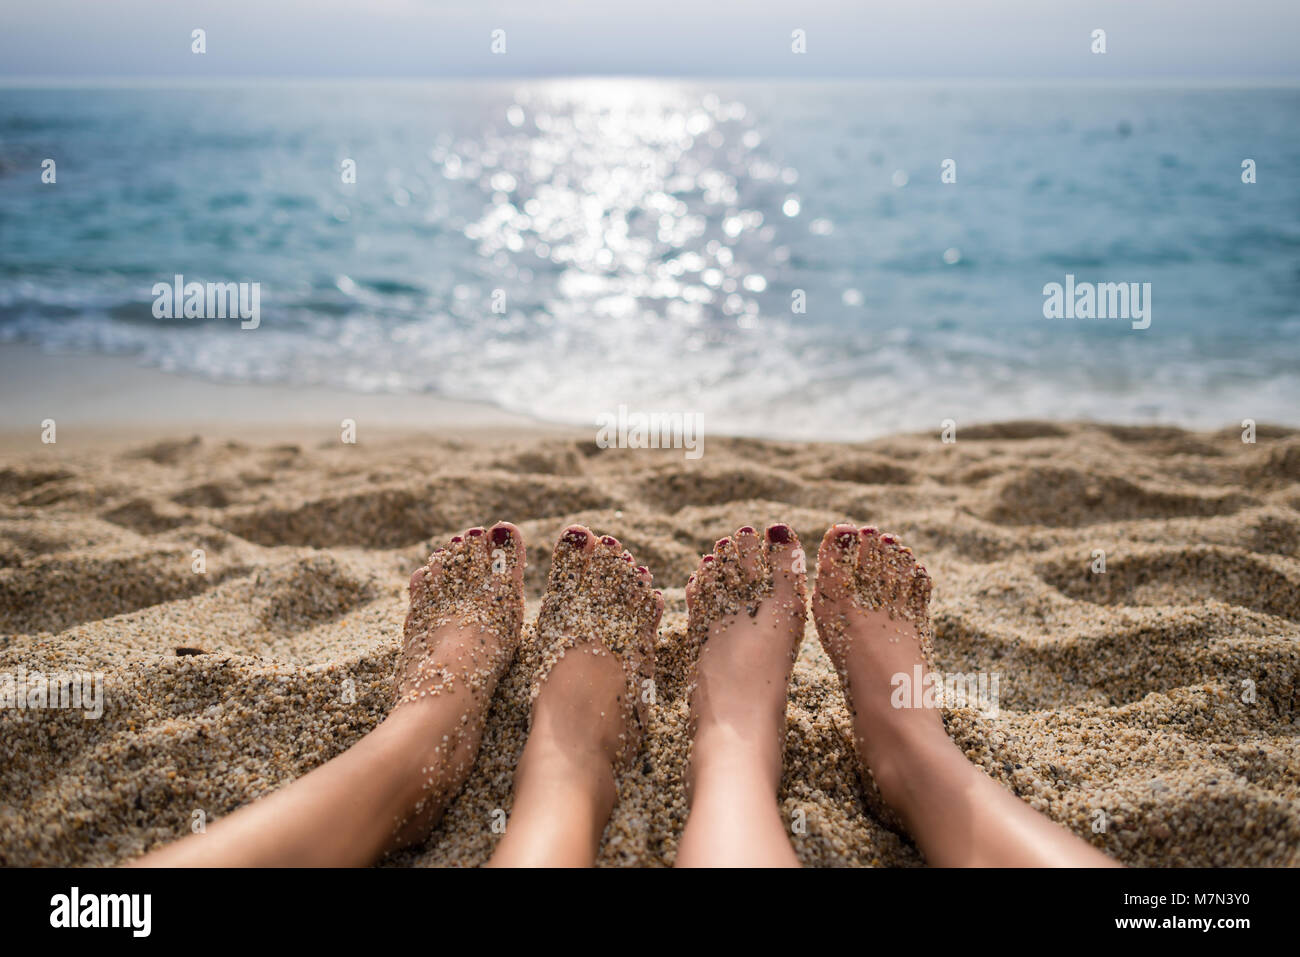 Travel concept. Scenic view from beach on sea and sky. Two girls are sunbathing on sand. Close-up view on pair of human legs. Focus on beach and legs Stock Photo